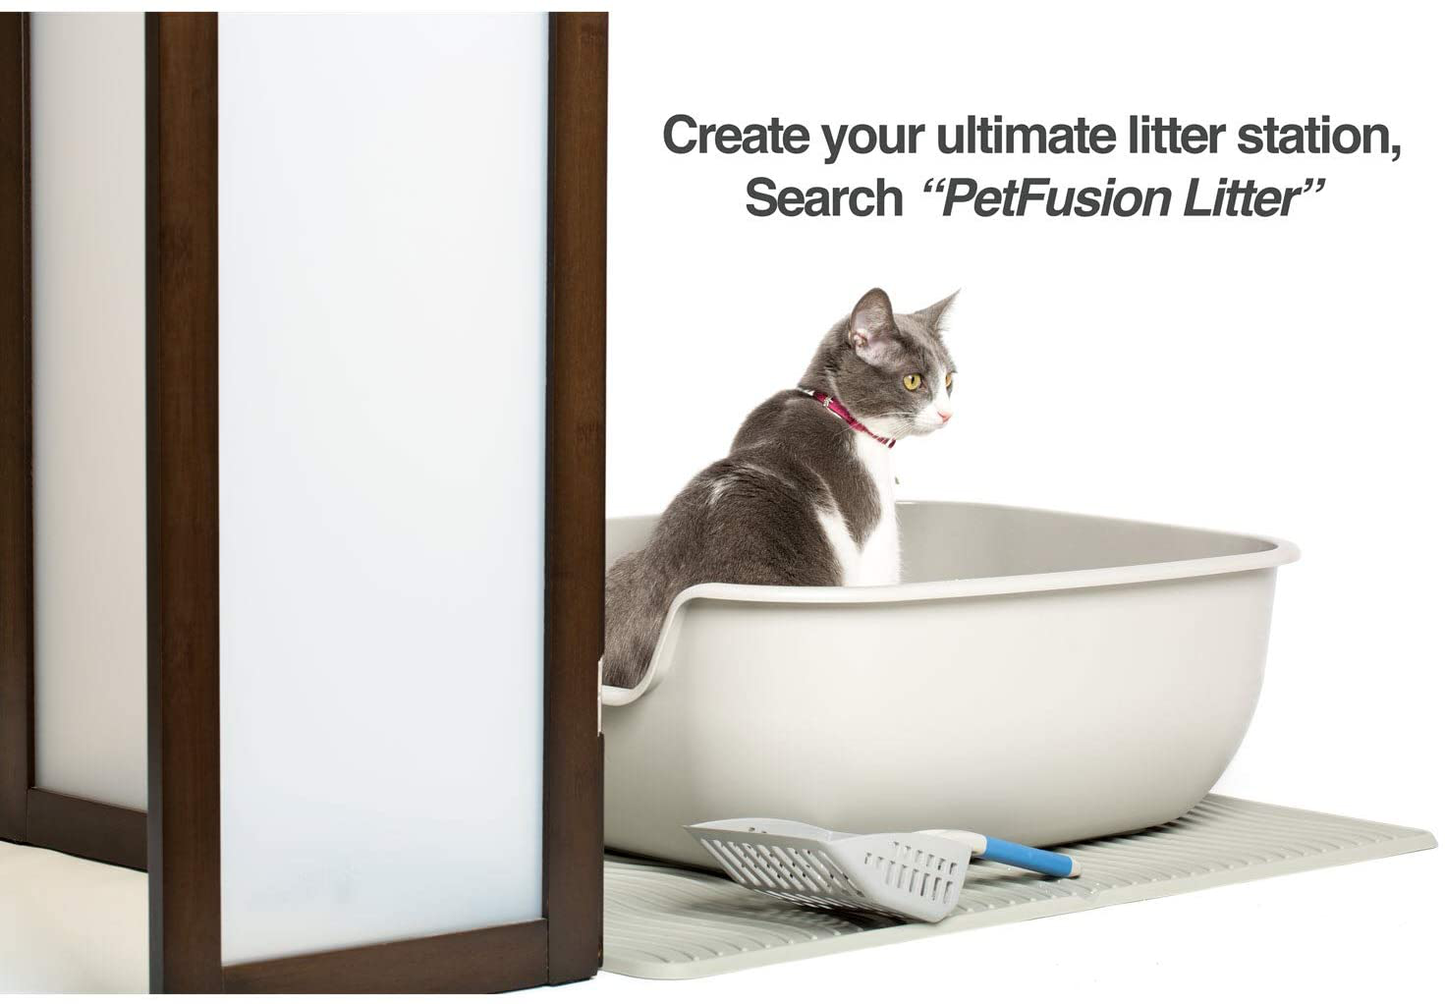 Petfusion Betterbox Cat Litter Box, Non-Stick Large Litter Box (Kitty Litter Box-Pet Safe Non-Stick Coating for Easy Cleaning of Cat Litter) Litter Pans Made of Stronger ABS Plastic Single or Two Pack